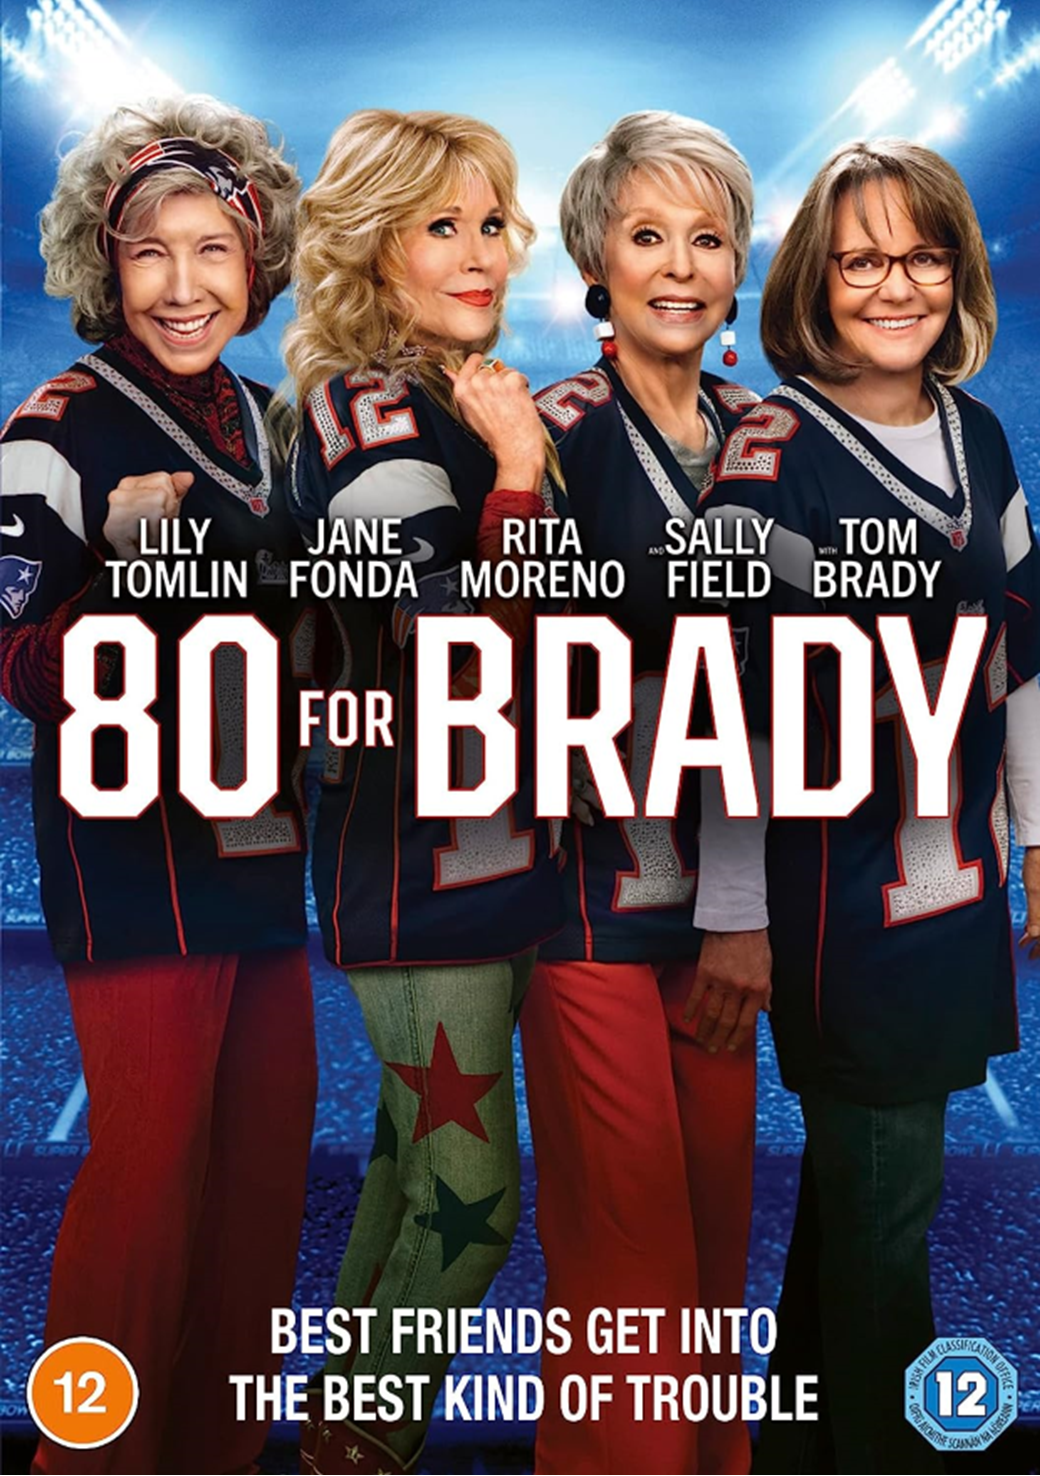 movie cover with 4 older women and words 80 for brady